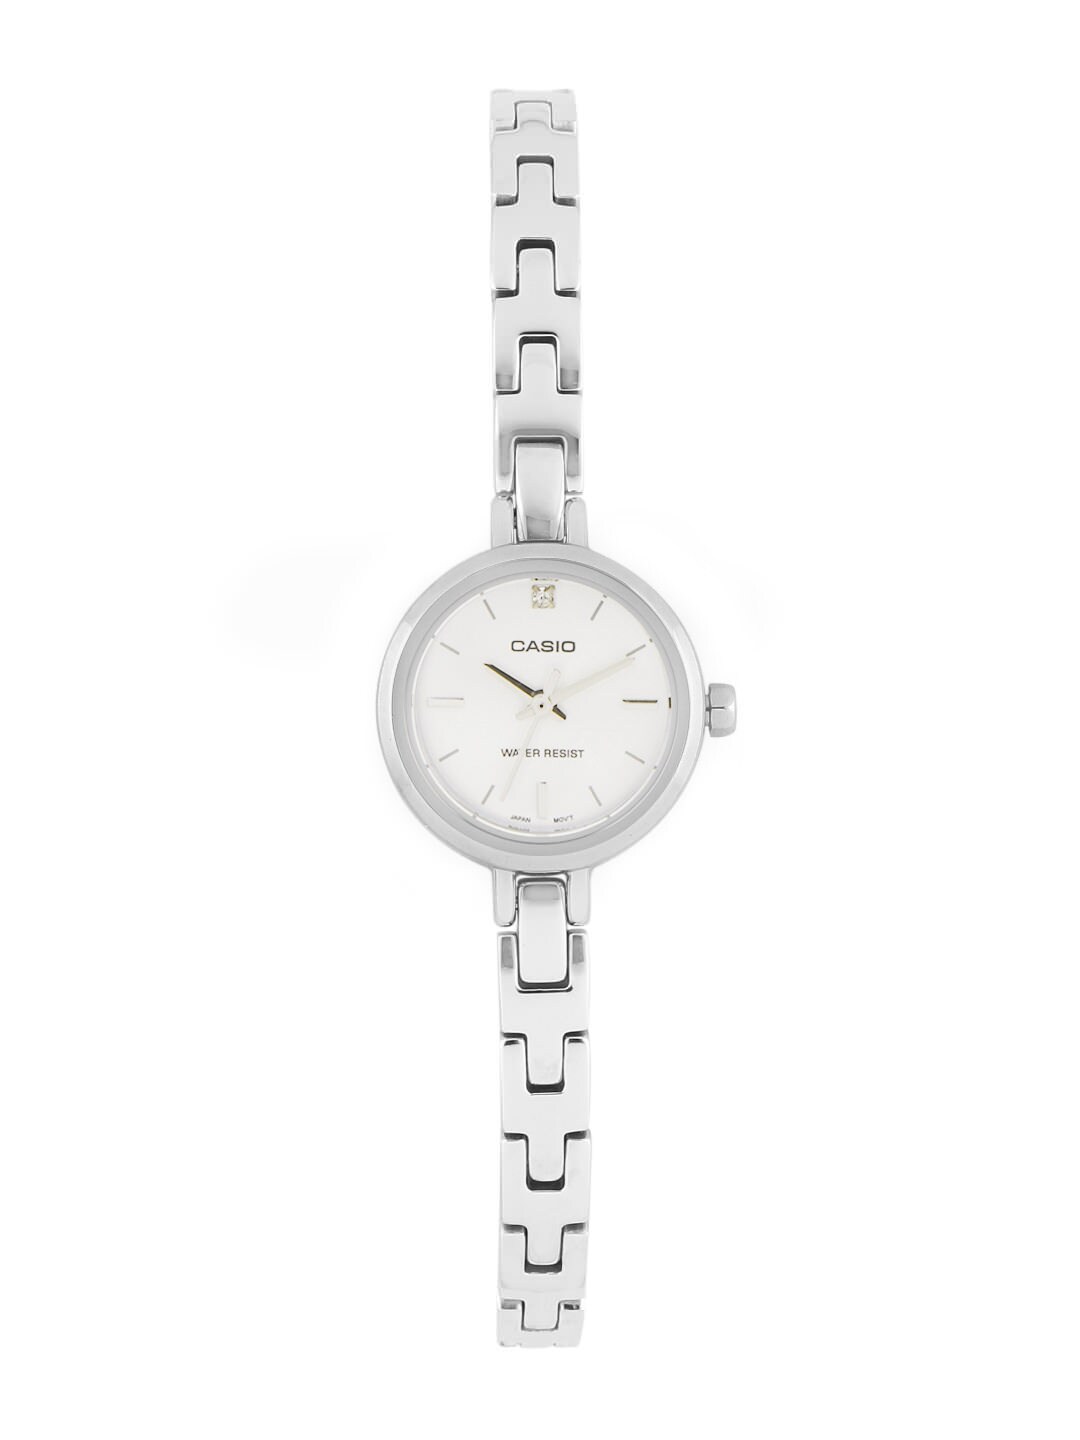 CASIO ENTICER Women White Dial Analogue Watch A653